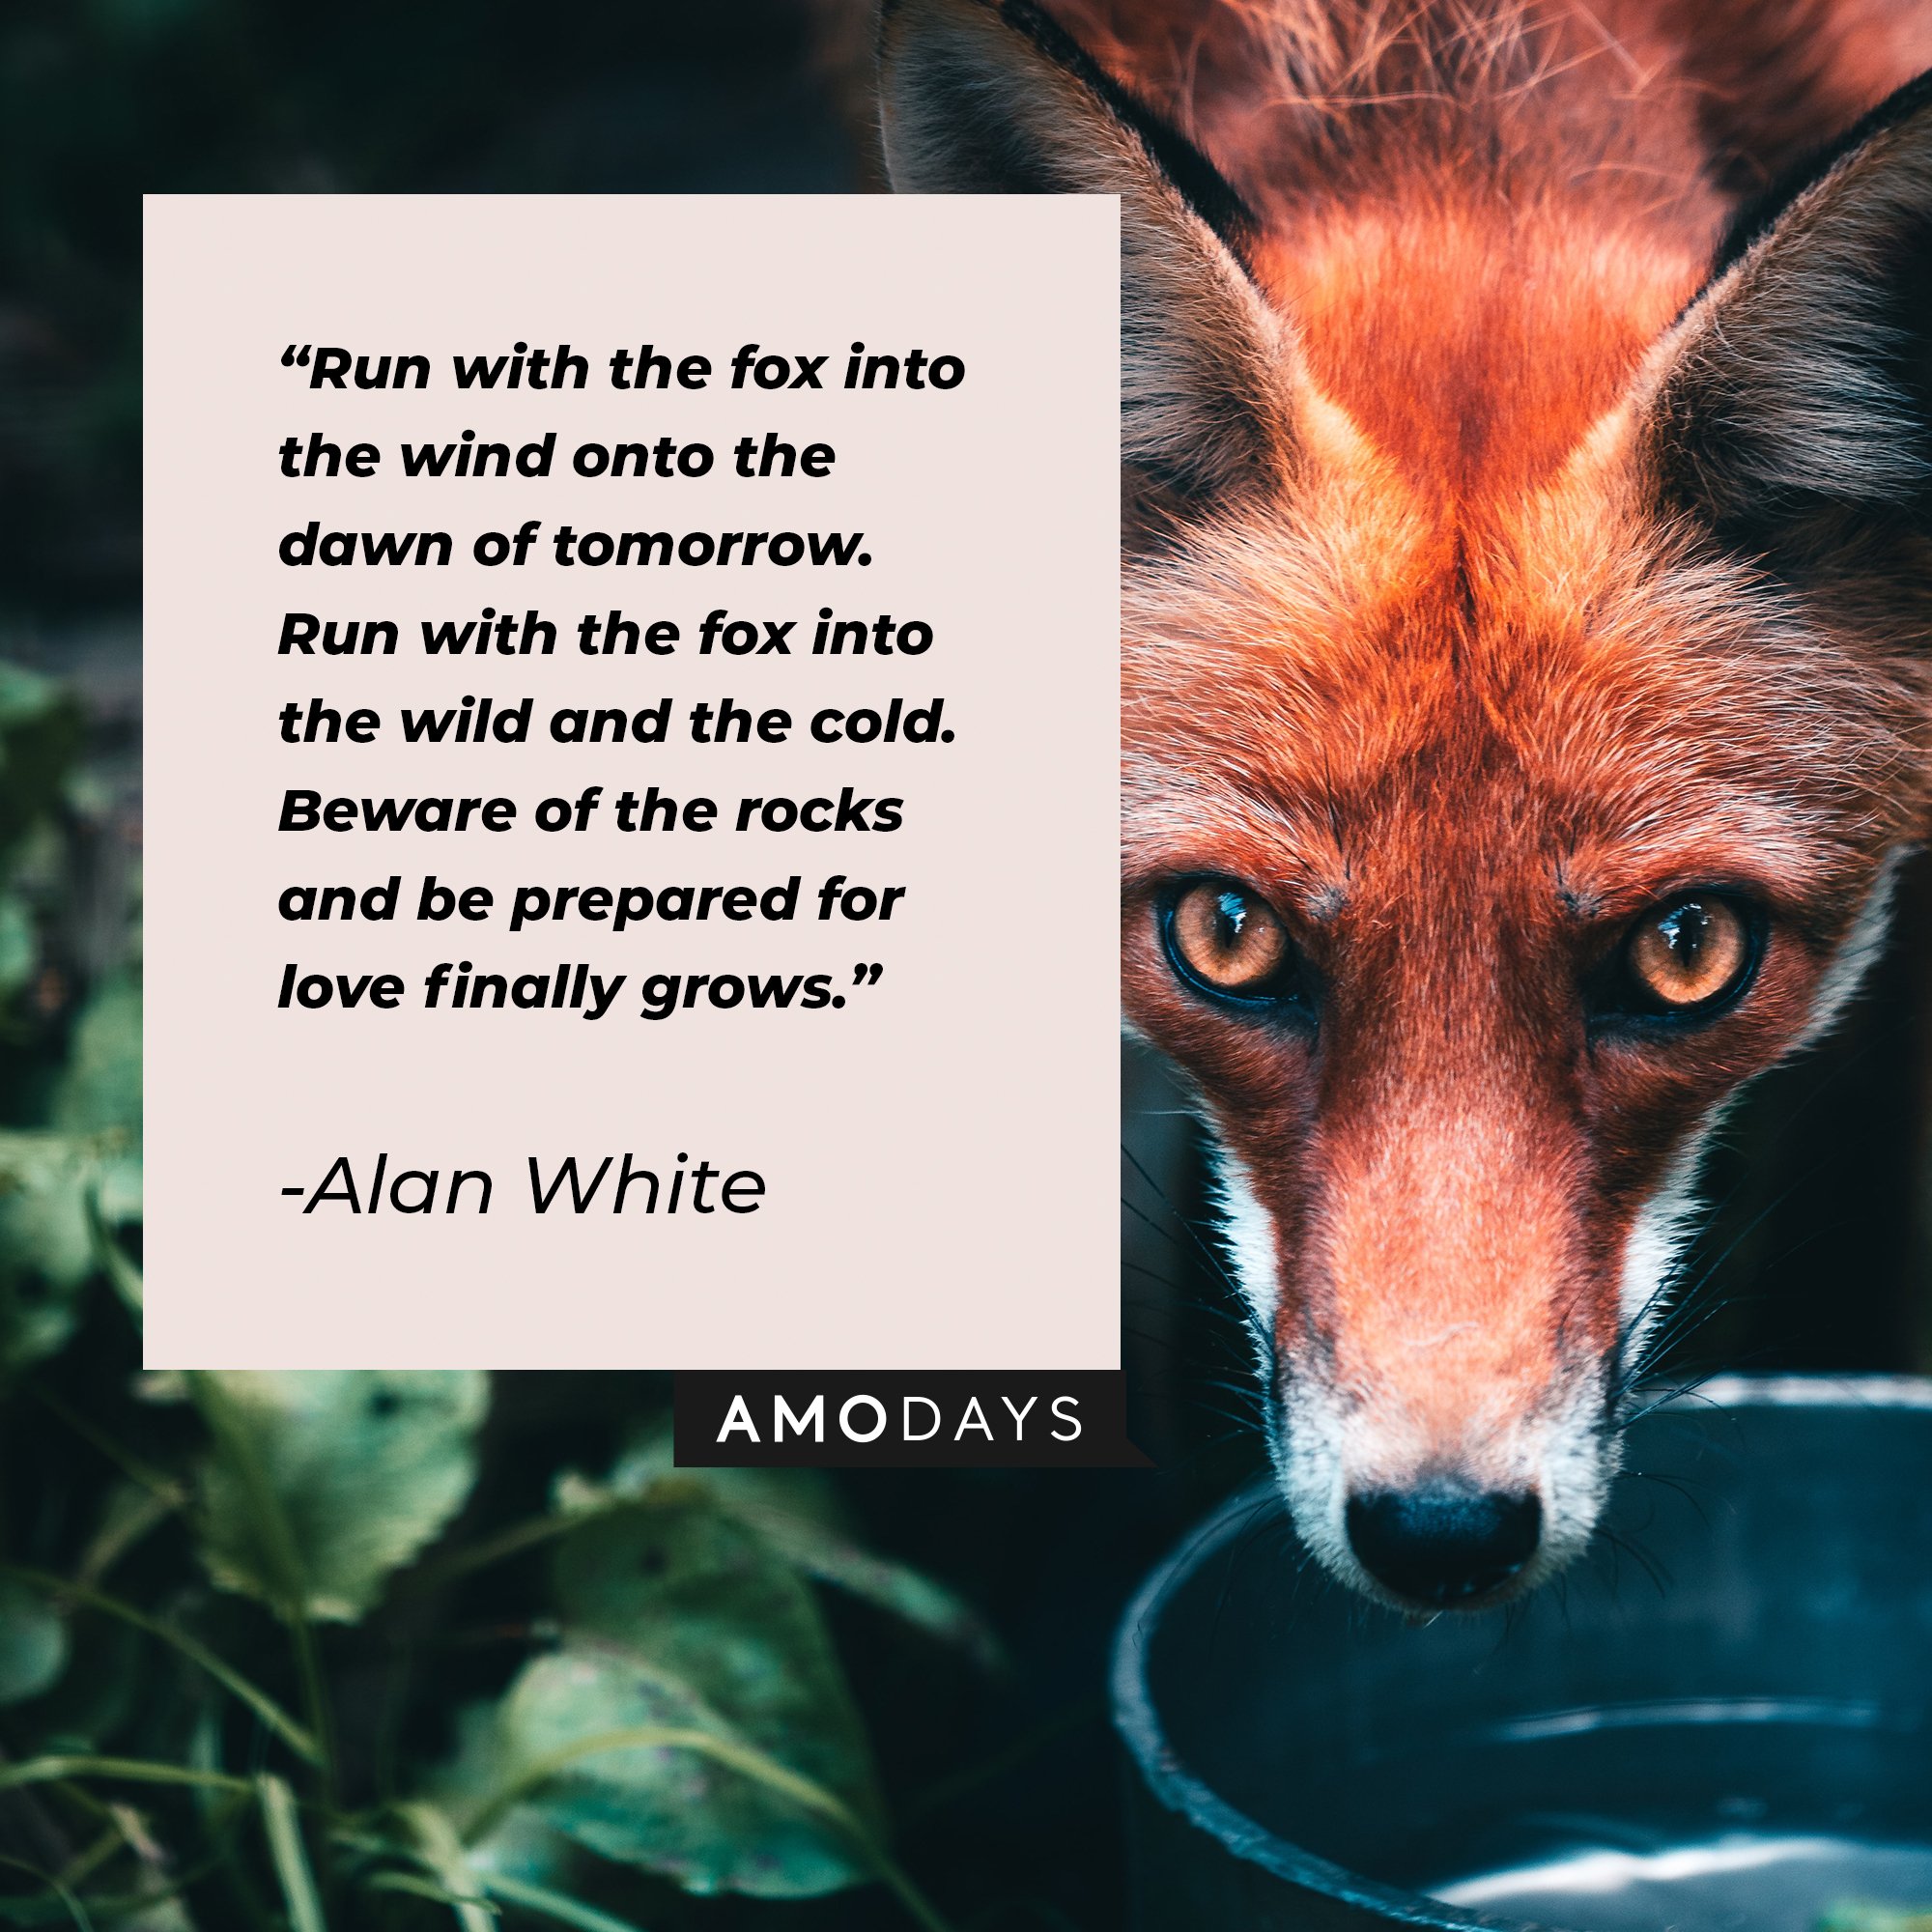 Alan White’s quote: "Run with the fox into the wind onto the dawn of tomorrow. Run with the fox into the wild and the cold. Beware of the rocks and be prepared for love finally grows." | Image: AmoDays